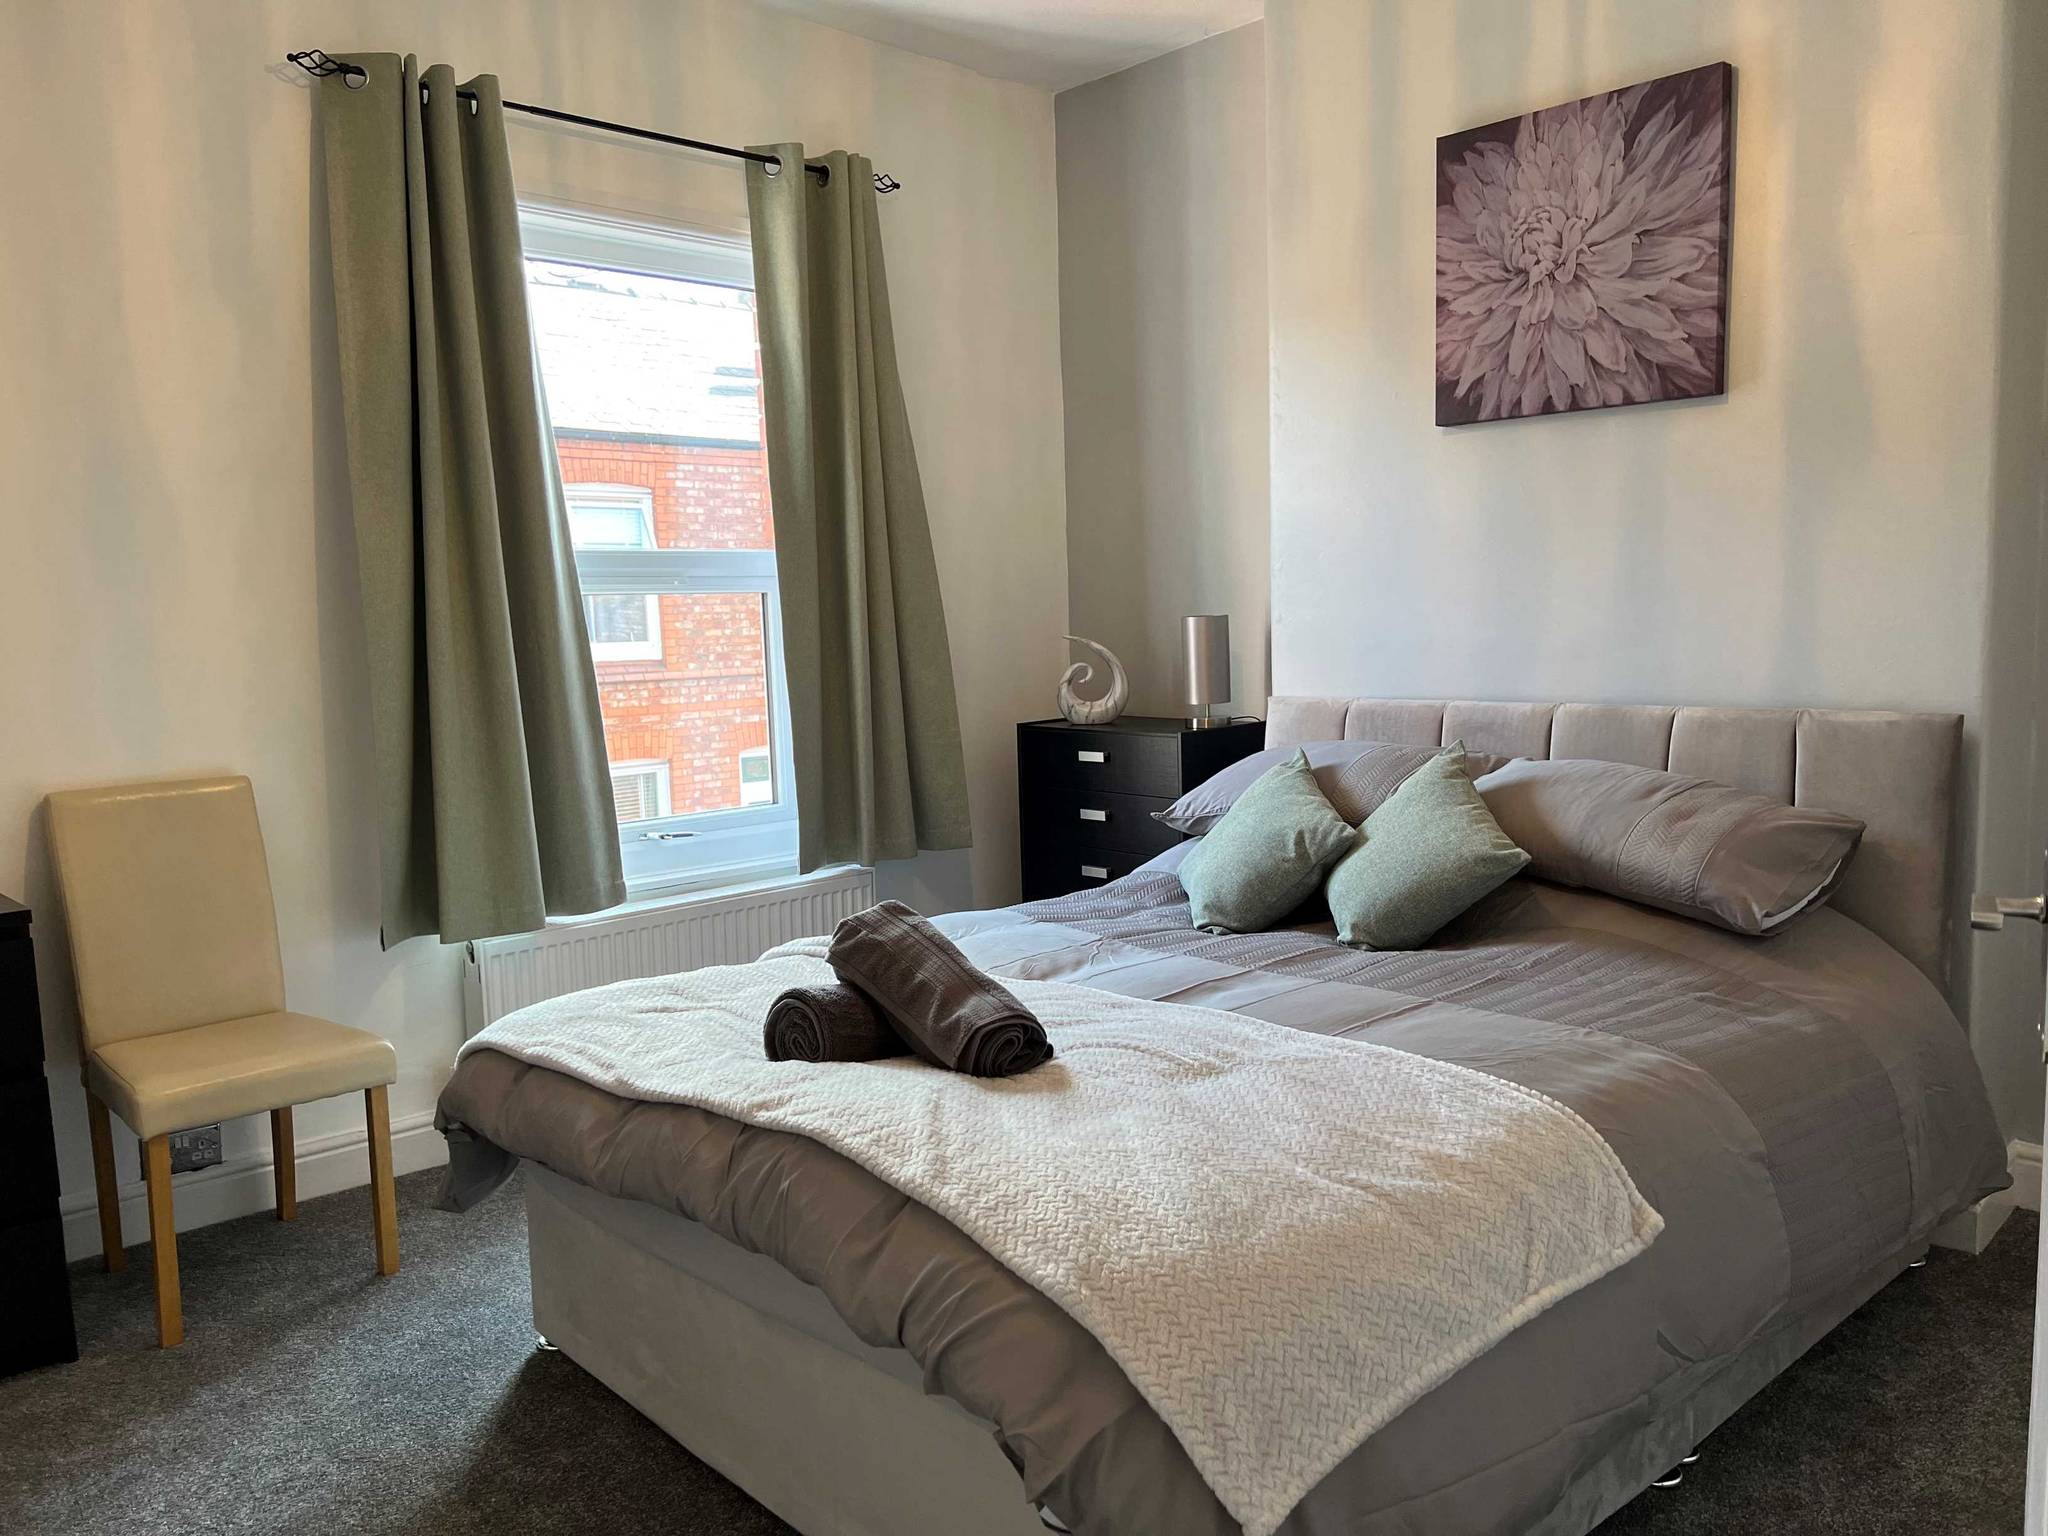 Amazing Spaces Relocations Ltd - Spacious 2-Bedroom House In Stockton Heath With Free WiFi By Amazing Spaces Relocations Ltd.